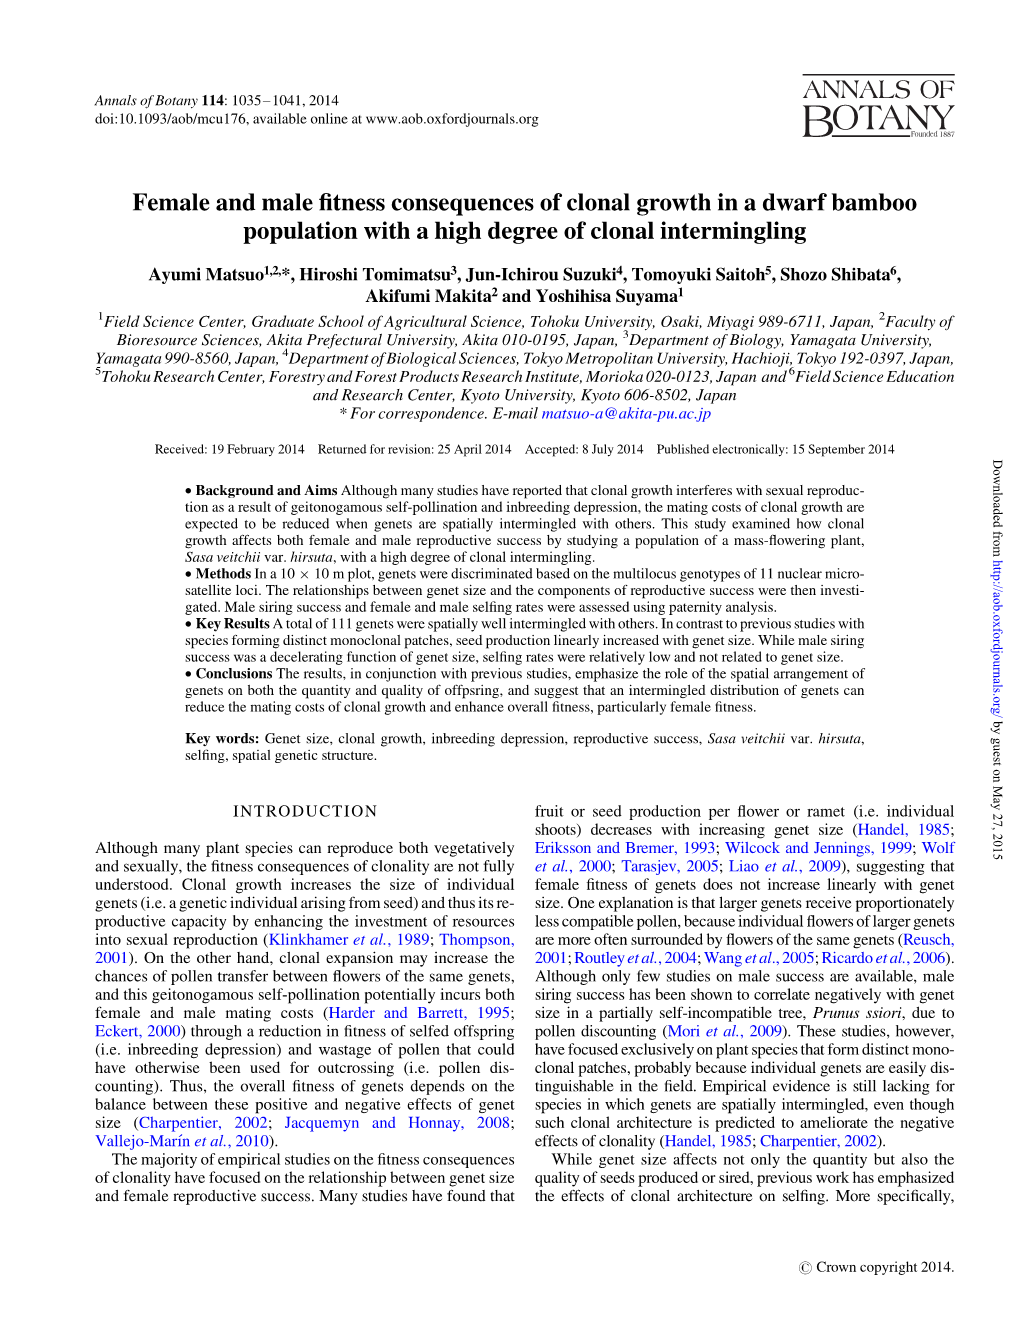 Female and Male Fitness Consequences of Clonal Growth in A